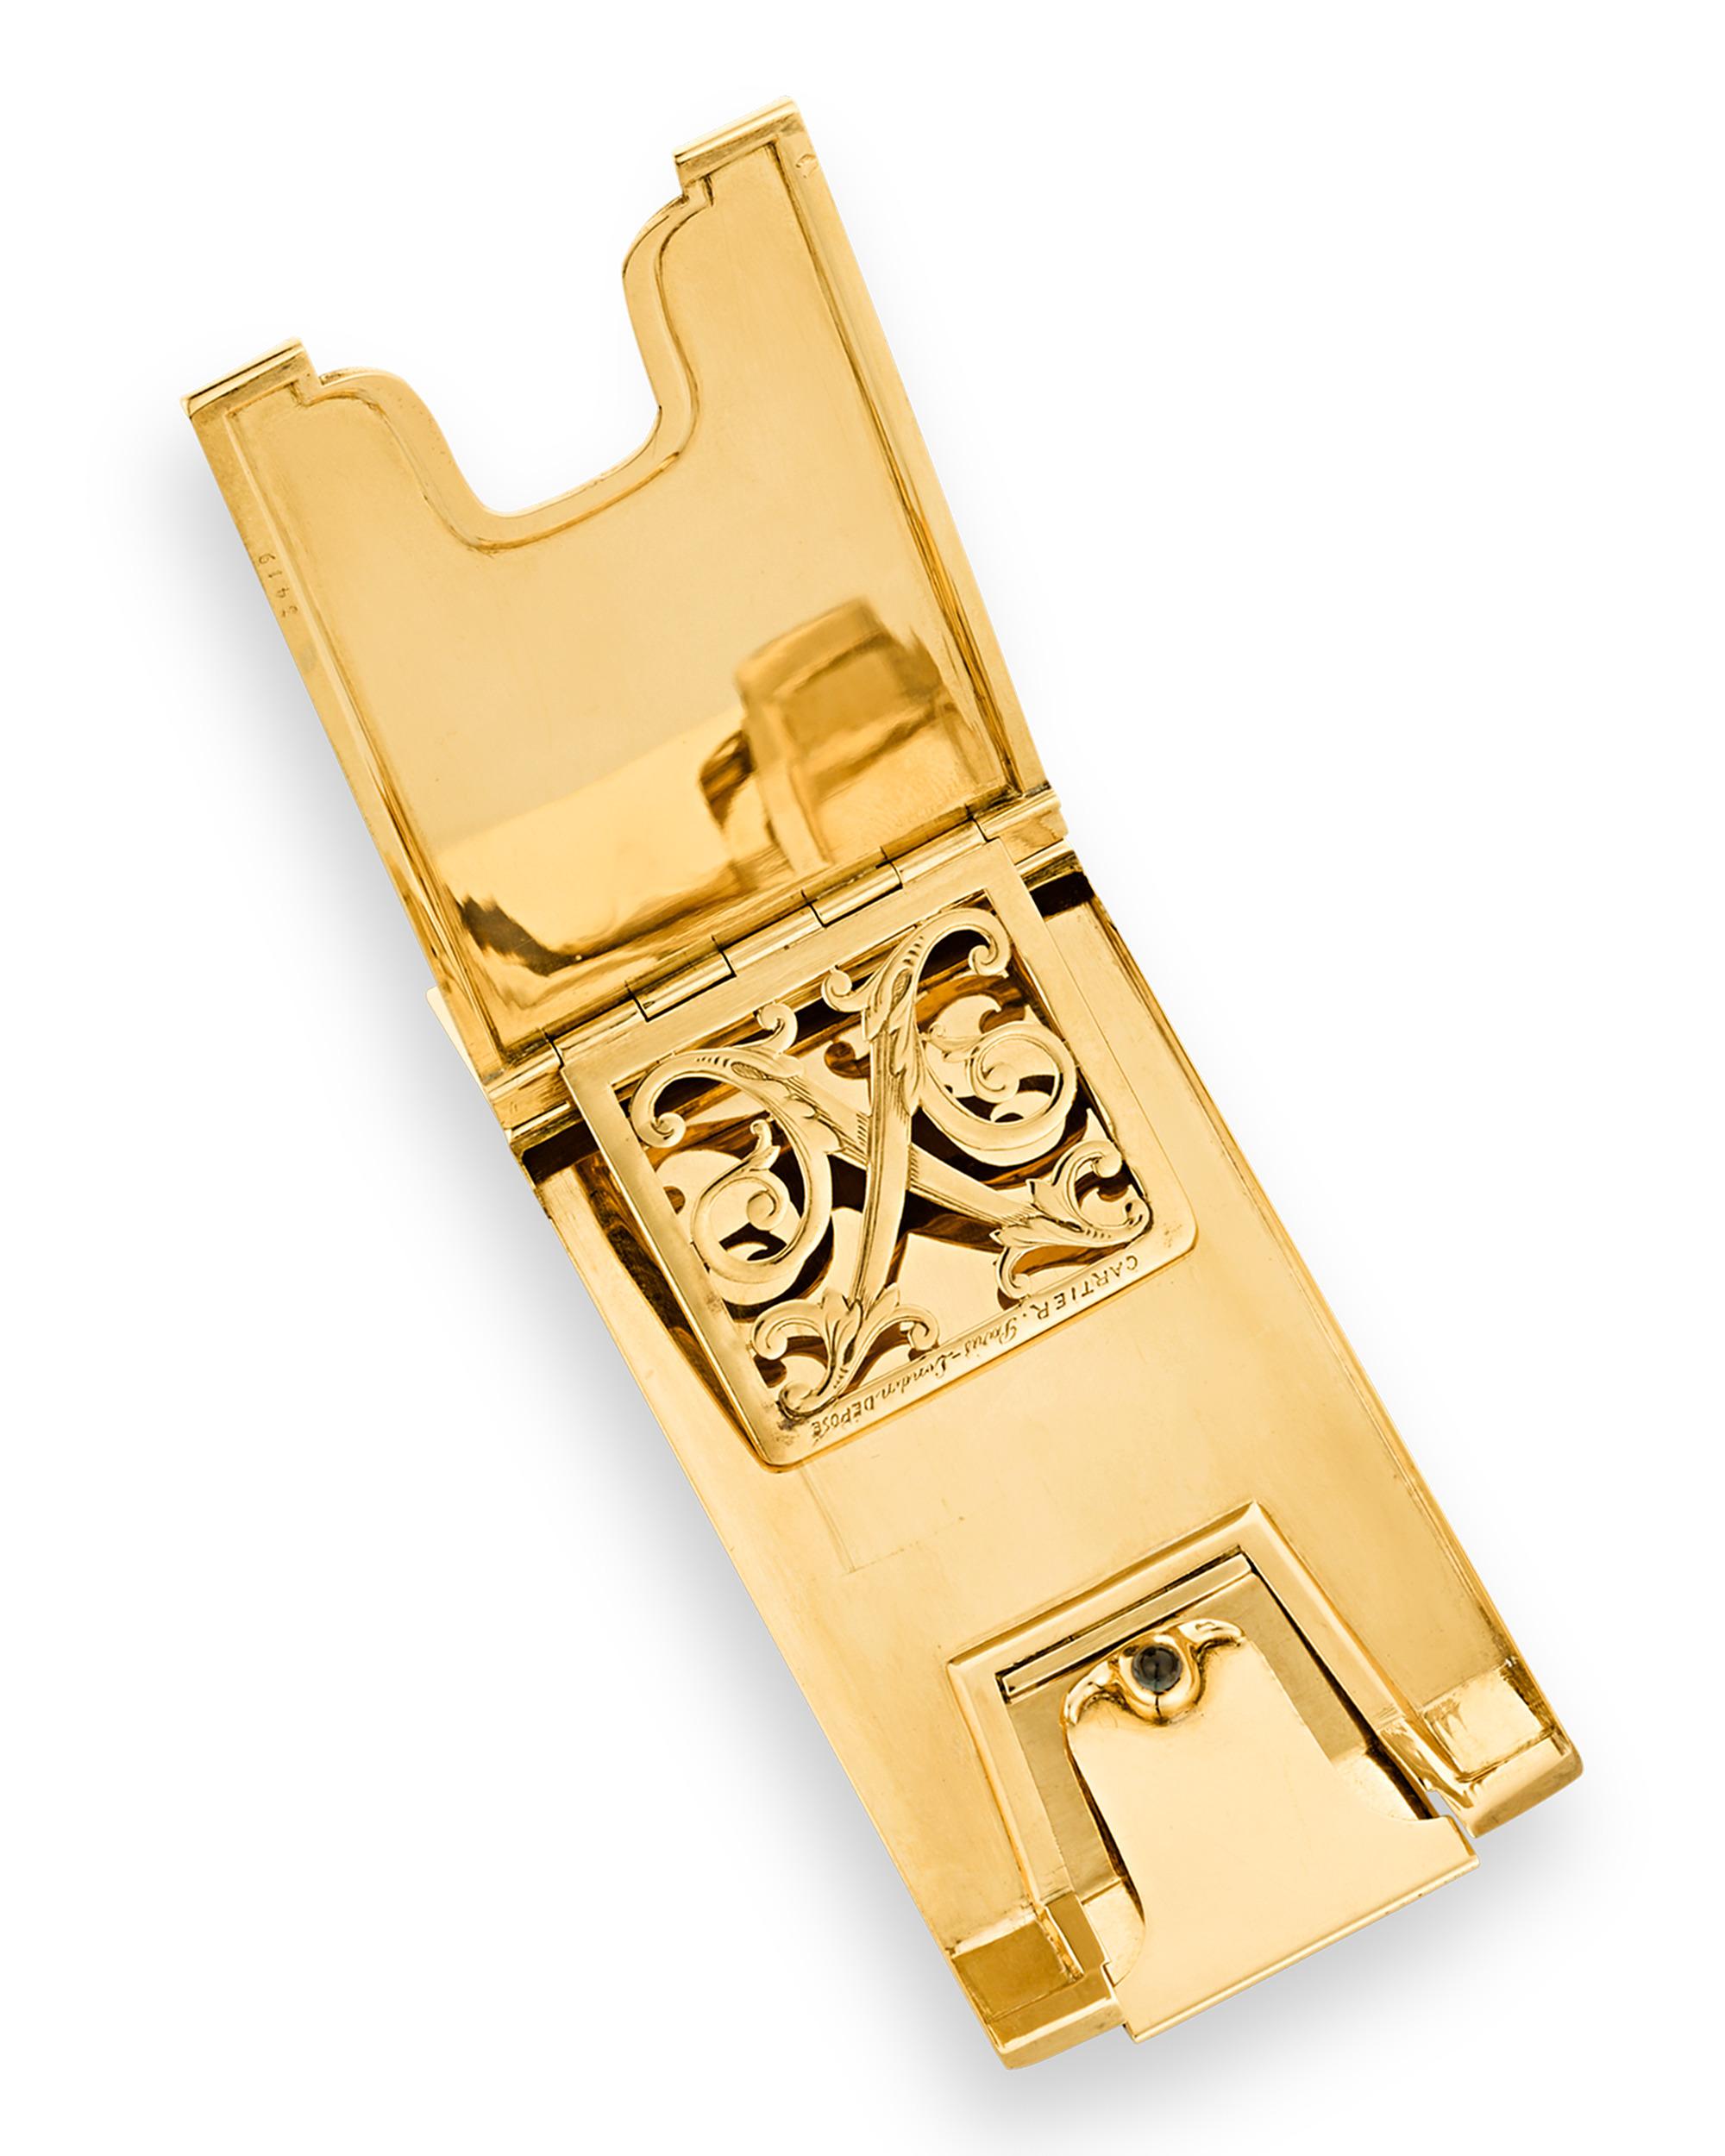 Formed entirely of 18K yellow gold polished to a high shine, this sleek case was created by the one and only Cartier. The exterior features a finely etched monogram and heraldic crown indicating this piece was made for a French Marquis. The case was